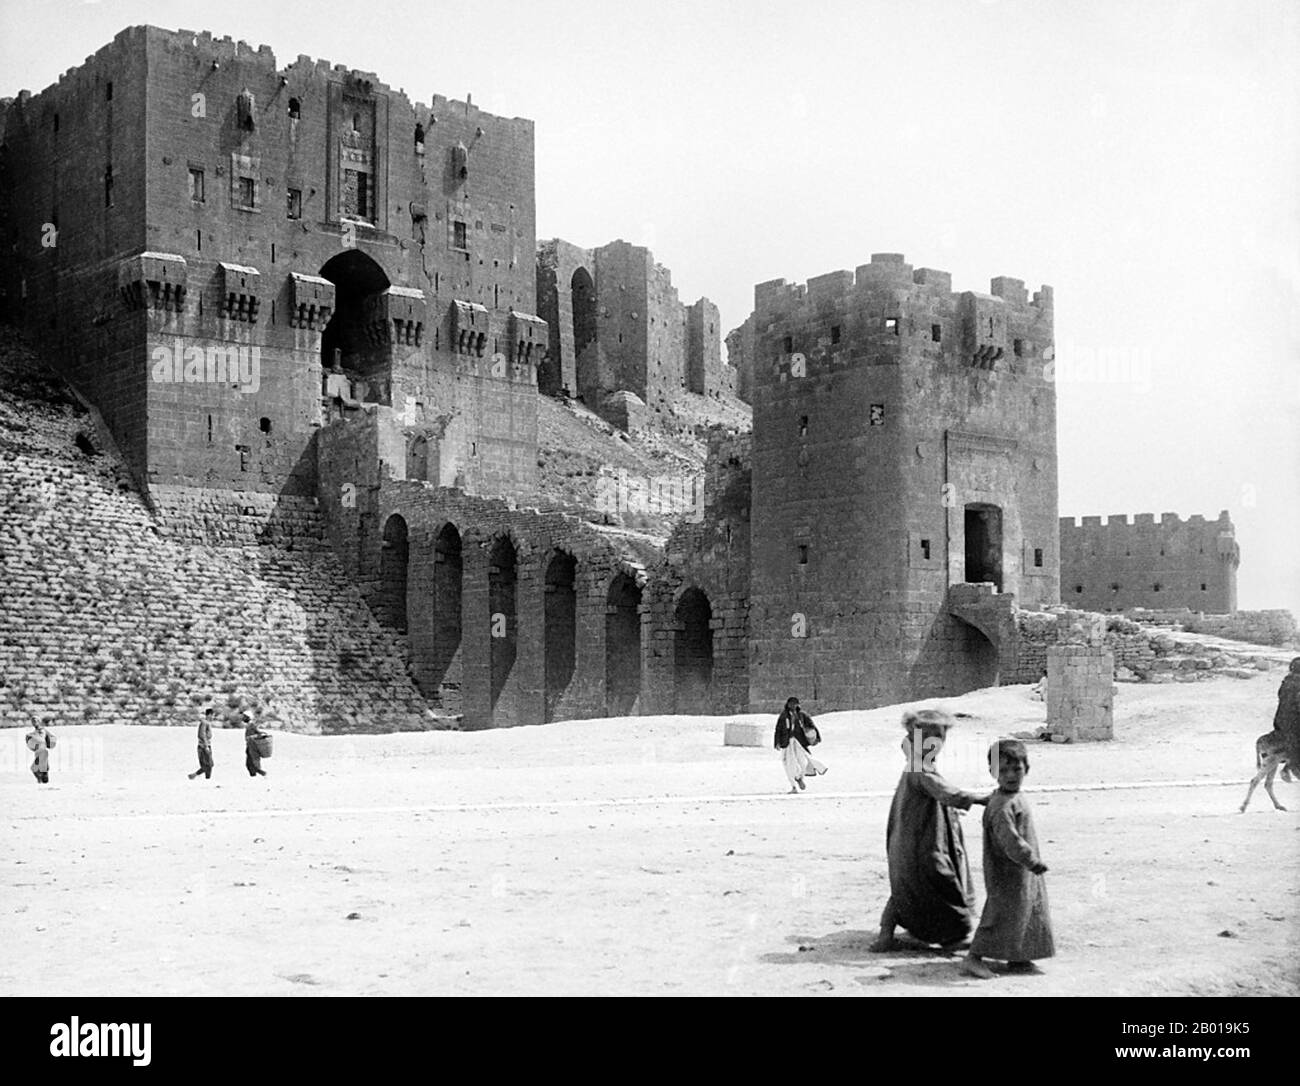 Syria: The Citadel at Aleppo (Haleb), c. 1900.  The Citadel of Aleppo is a large medieval fortified palace in the centre of the old city of Aleppo, northern Syria. One of the oldest and largest castles in the world, usage of the Citadel hill dates back to at least the middle of the 3rd millennium BCE. Subsequently occupied by many civilizations such as the Greeks, Byzantines, Ayyubids and Mamluks, the majority of the construction as it stands today is thought to originate from the Ayyubid period. Stock Photo